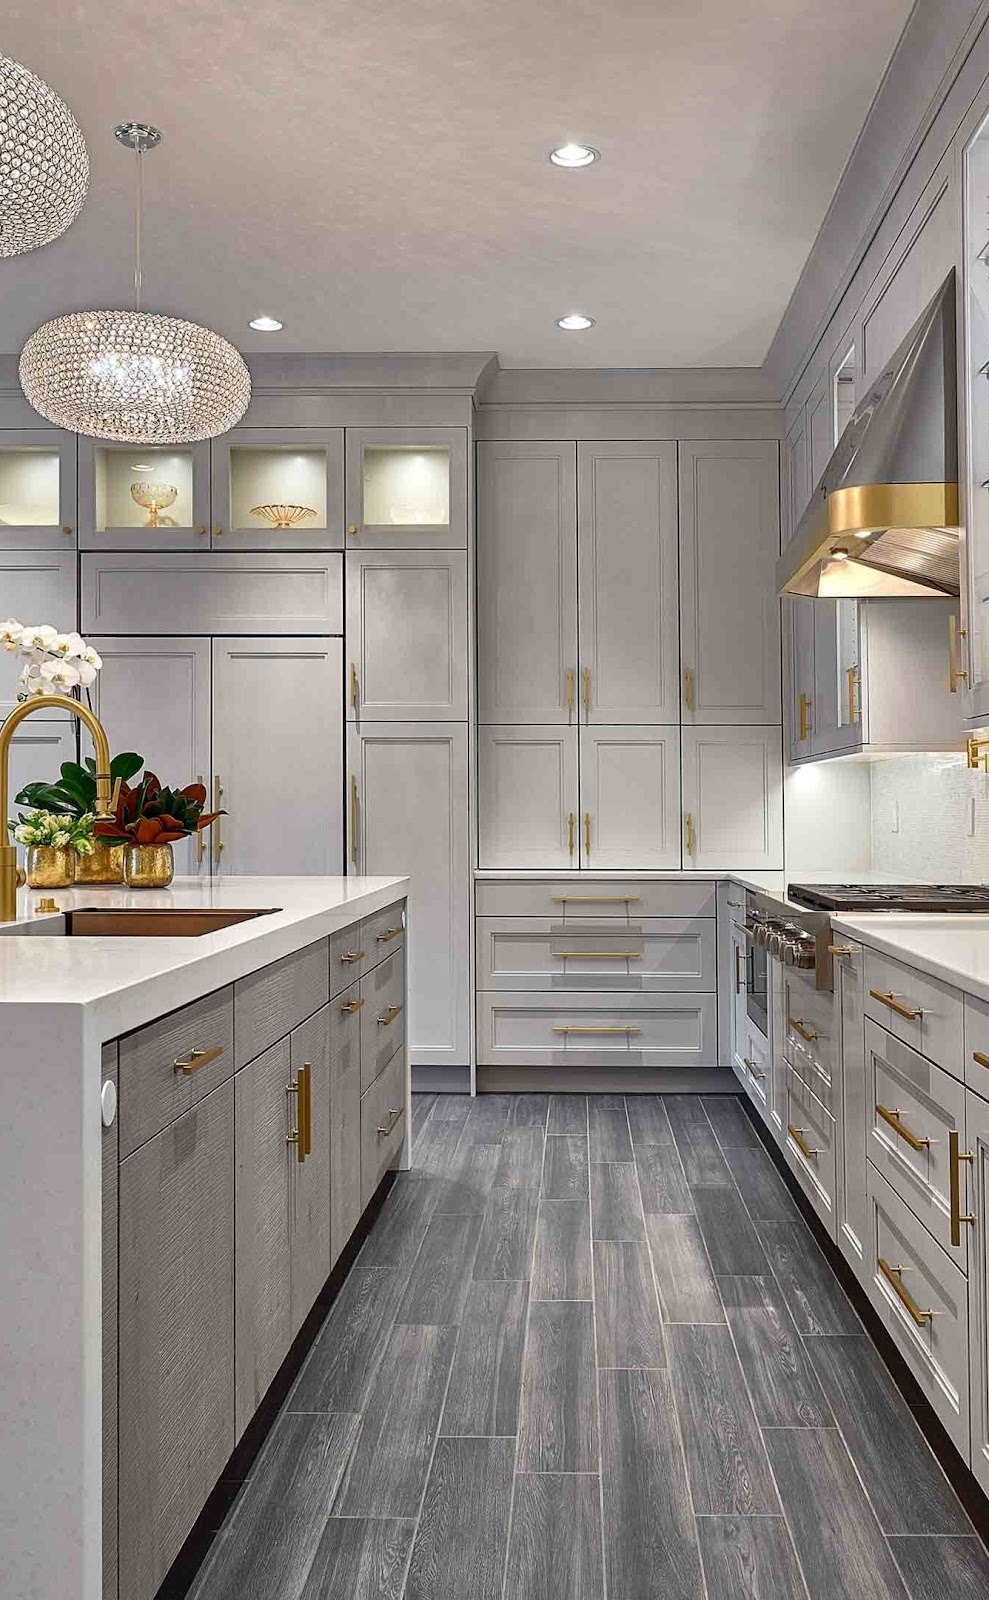 8 Pantry Design Ideas for Your New Kitchen | The Kitchen Company